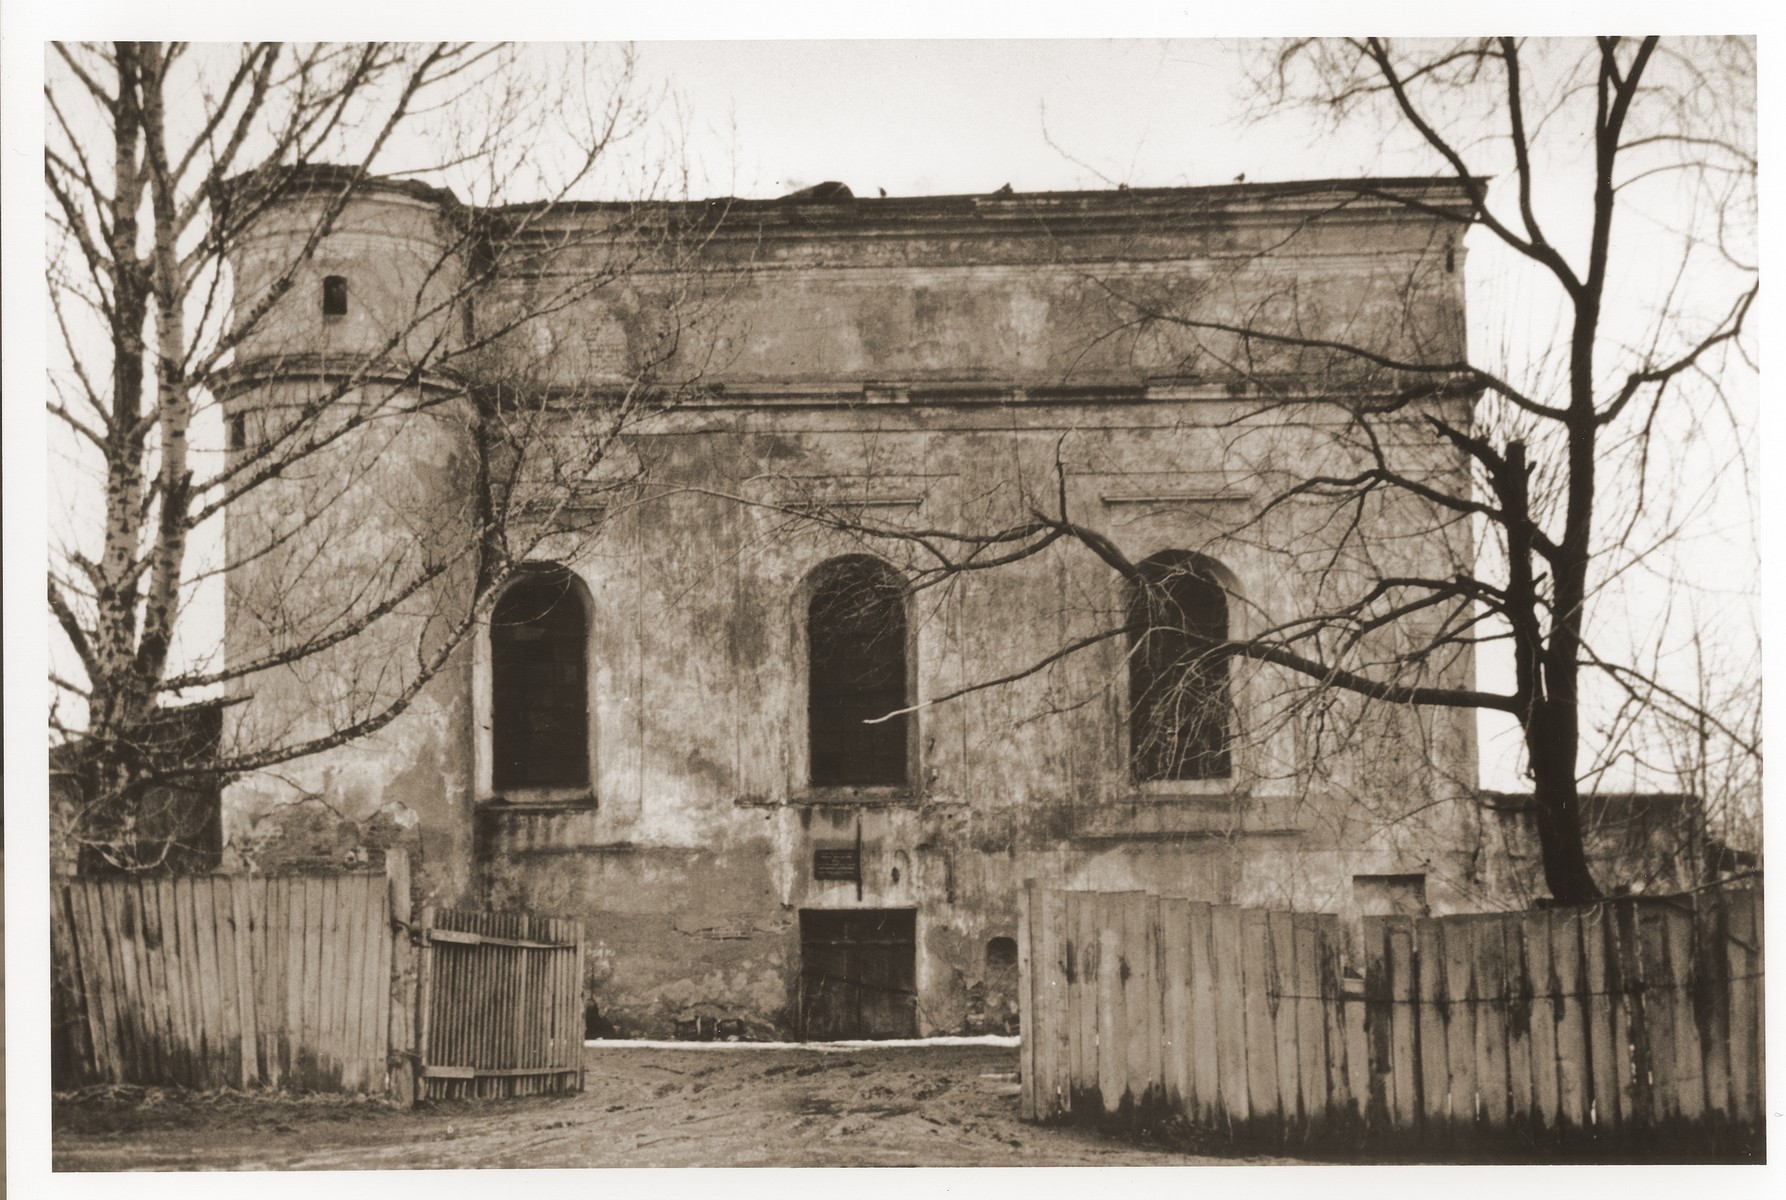 Exterior of the synagogue in Bykhov, Belorussia.